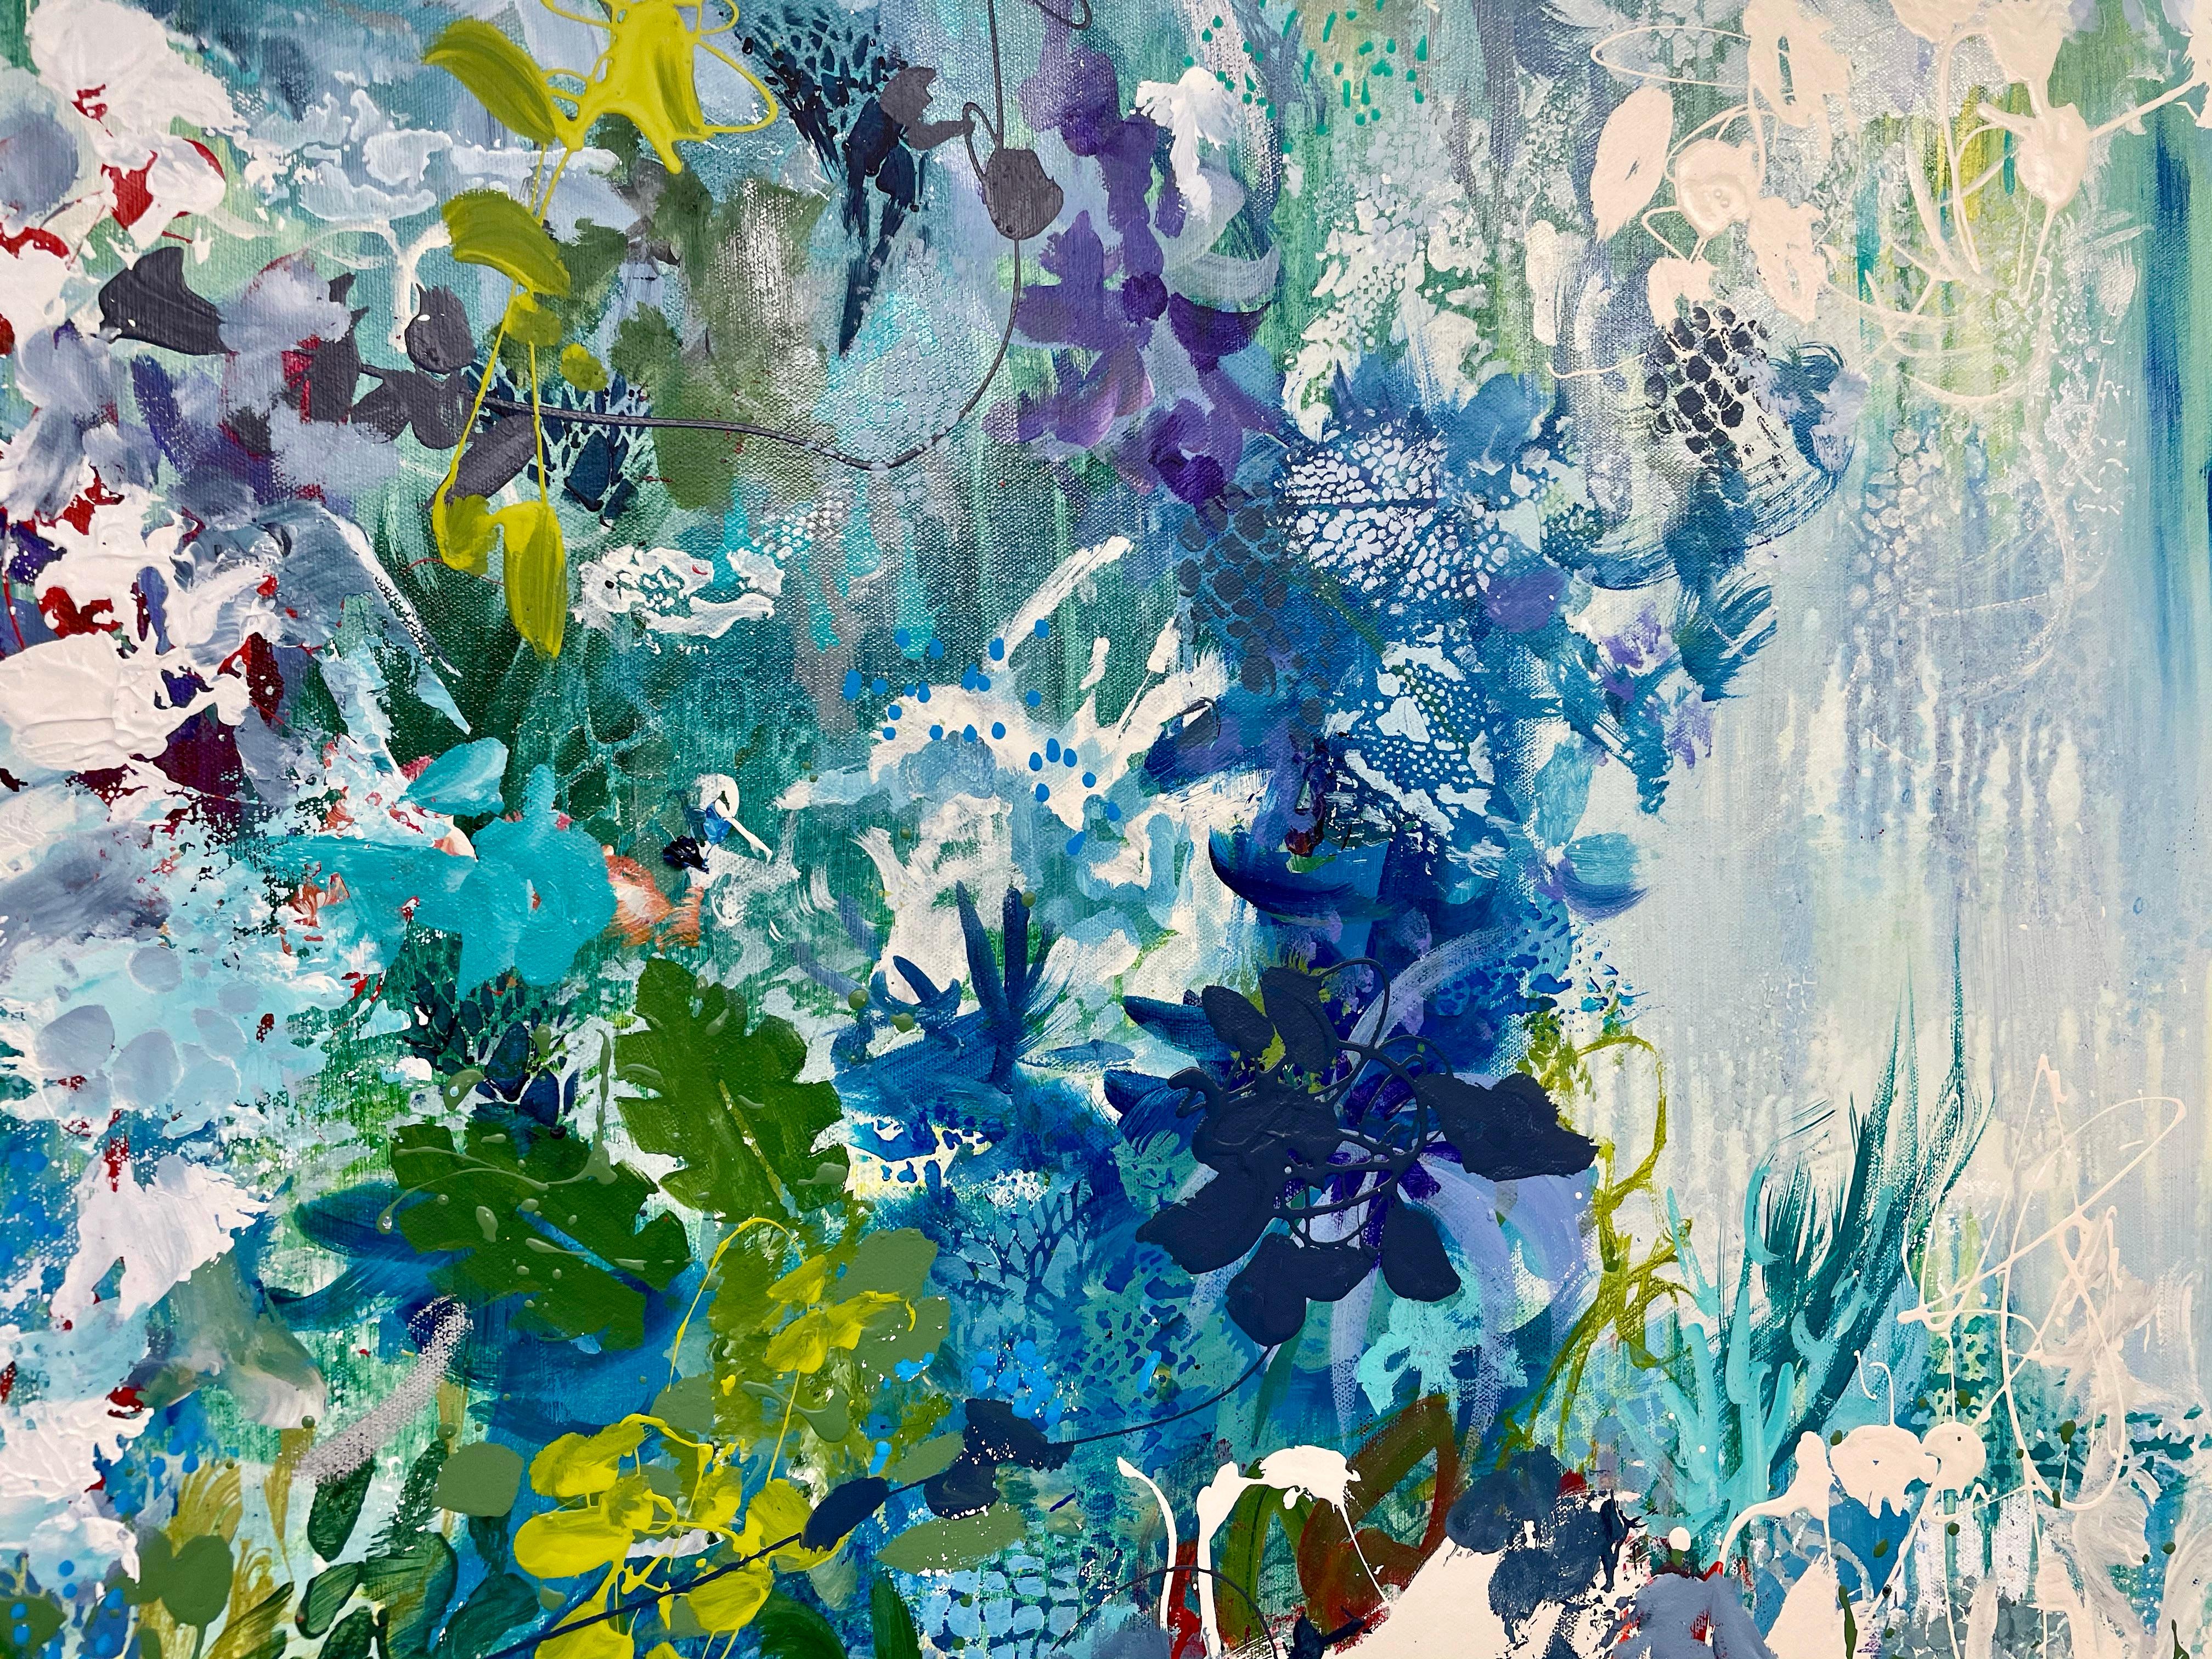 <p>Artist Comments<br>Artist DL Watson created this light, tropical scene based on her butterfly garden in her south Florida home. Lush greens and cool blues provide a vibrant backdrop for the blossoming white flowers. 